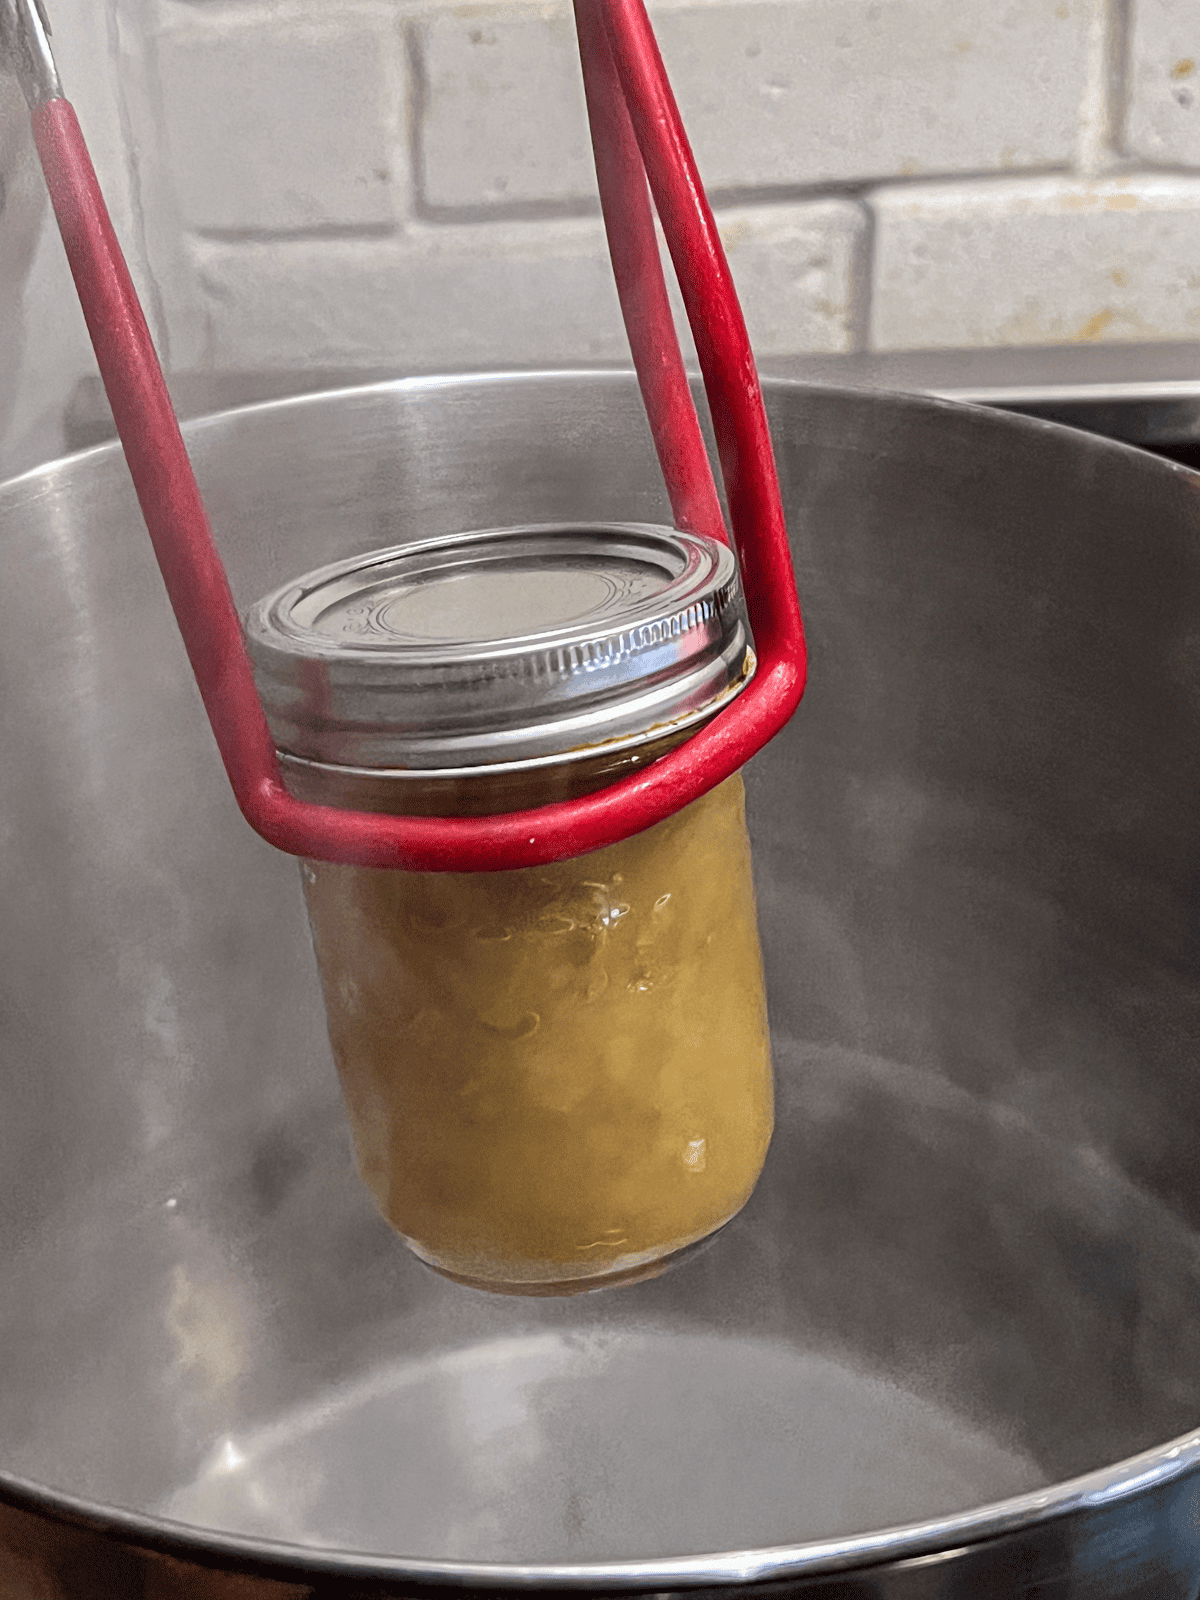 Mason jar being placed into water bath with red tongs.